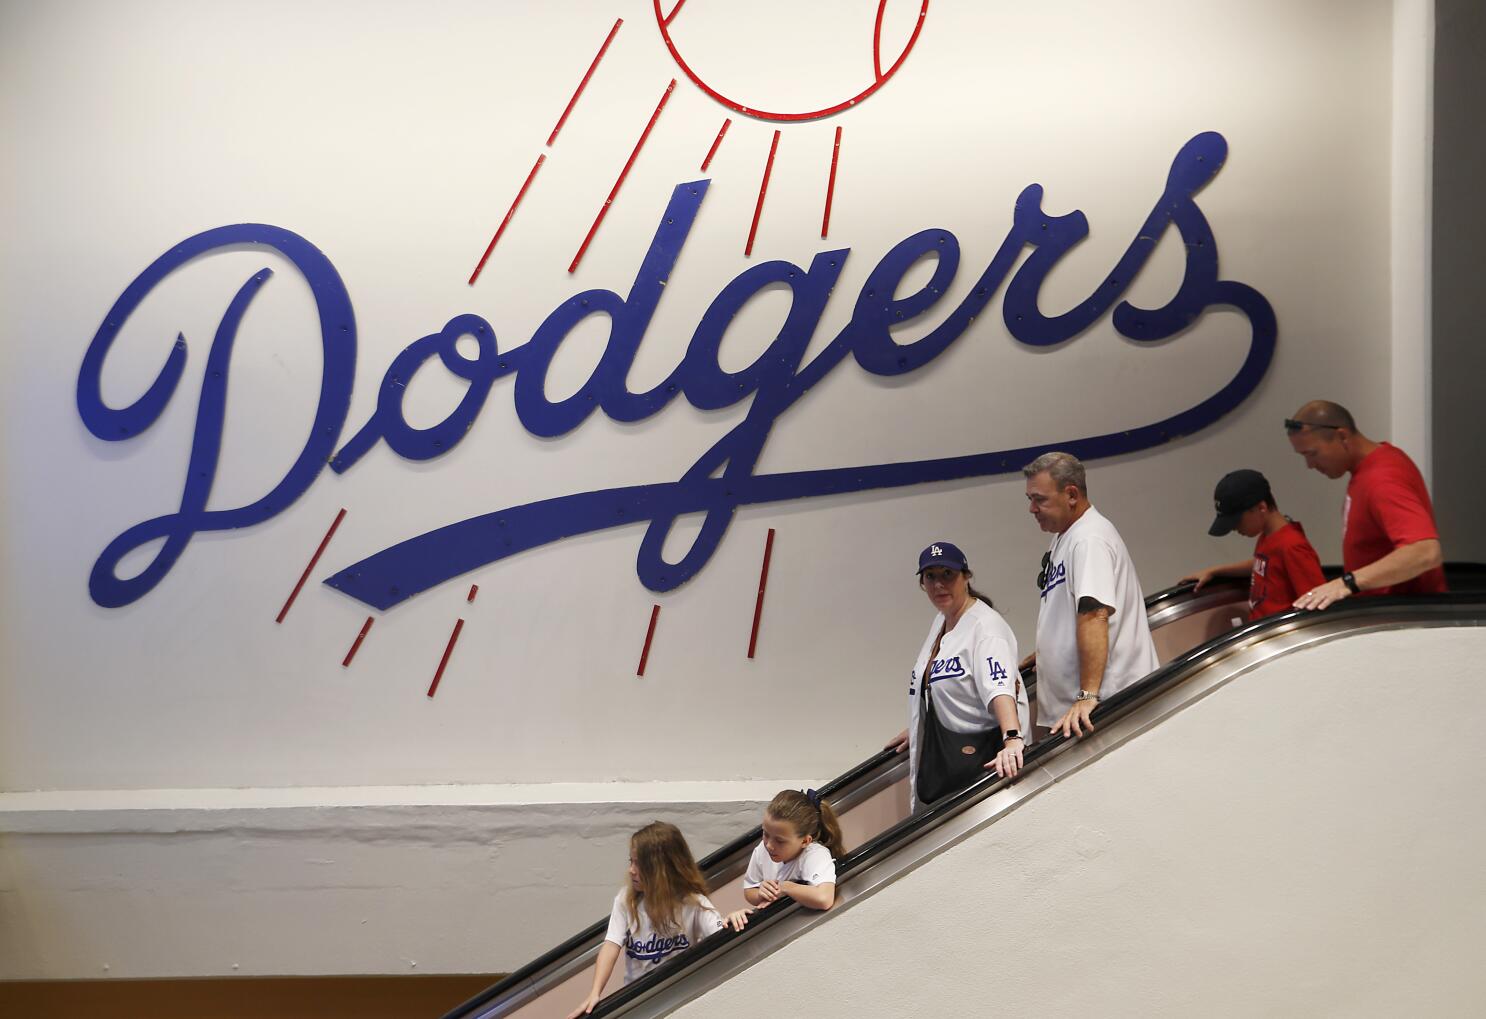 Dodgers sell minority share of team - Los Angeles Times